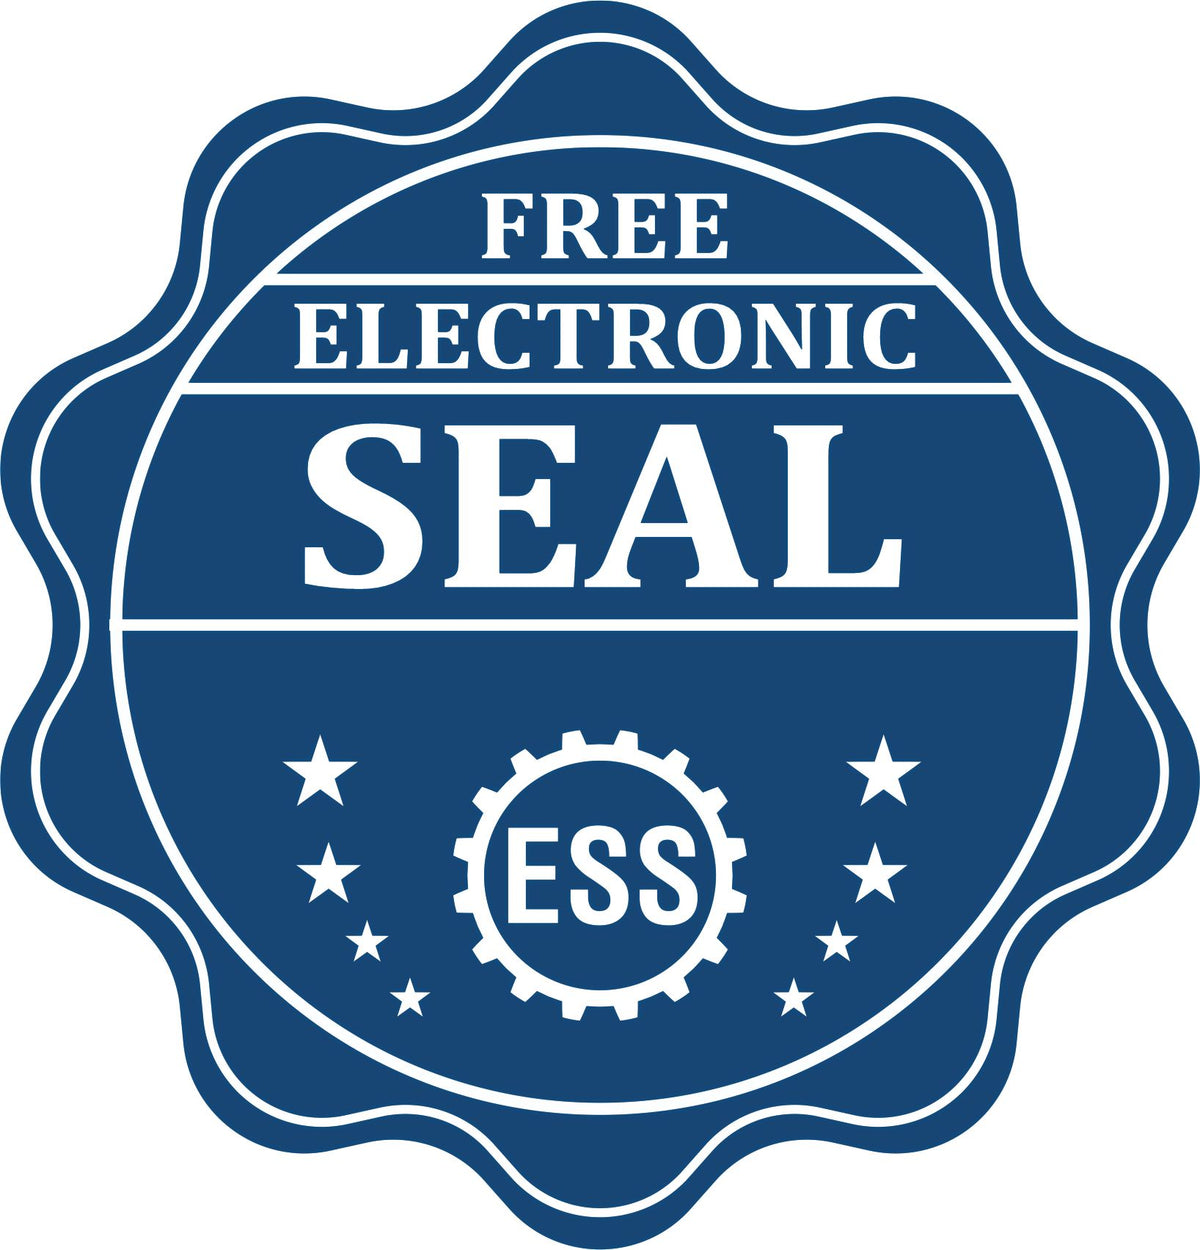 A badge showing a free electronic seal for the Hybrid Mississippi Geologist Seal with stars and the ESS gear on the emblem.